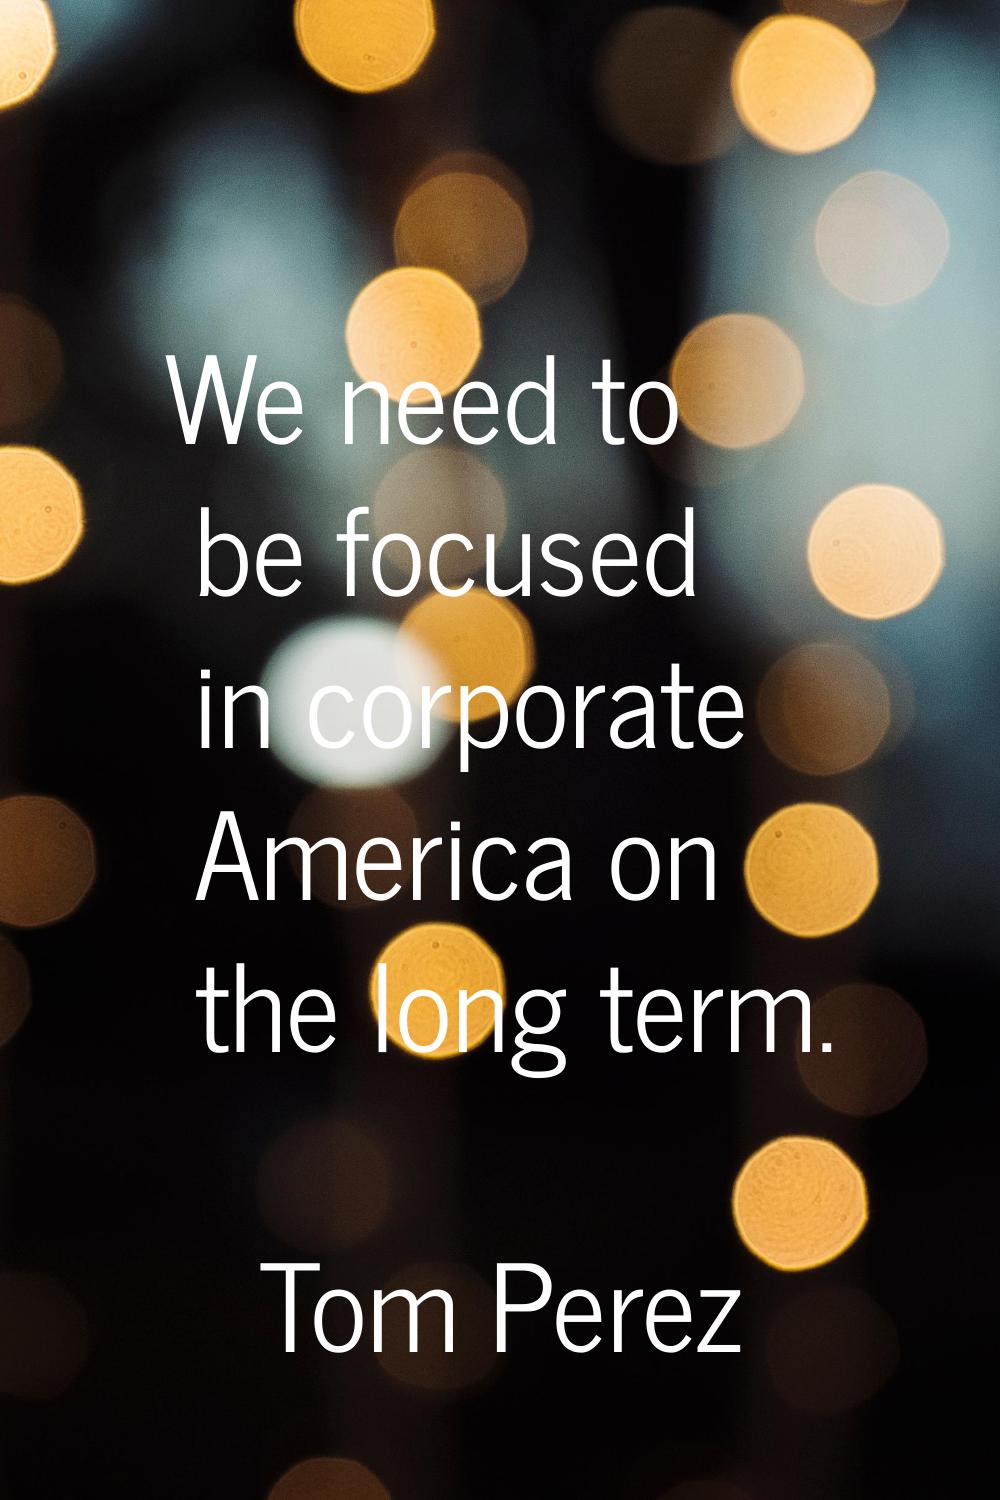 We need to be focused in corporate America on the long term.